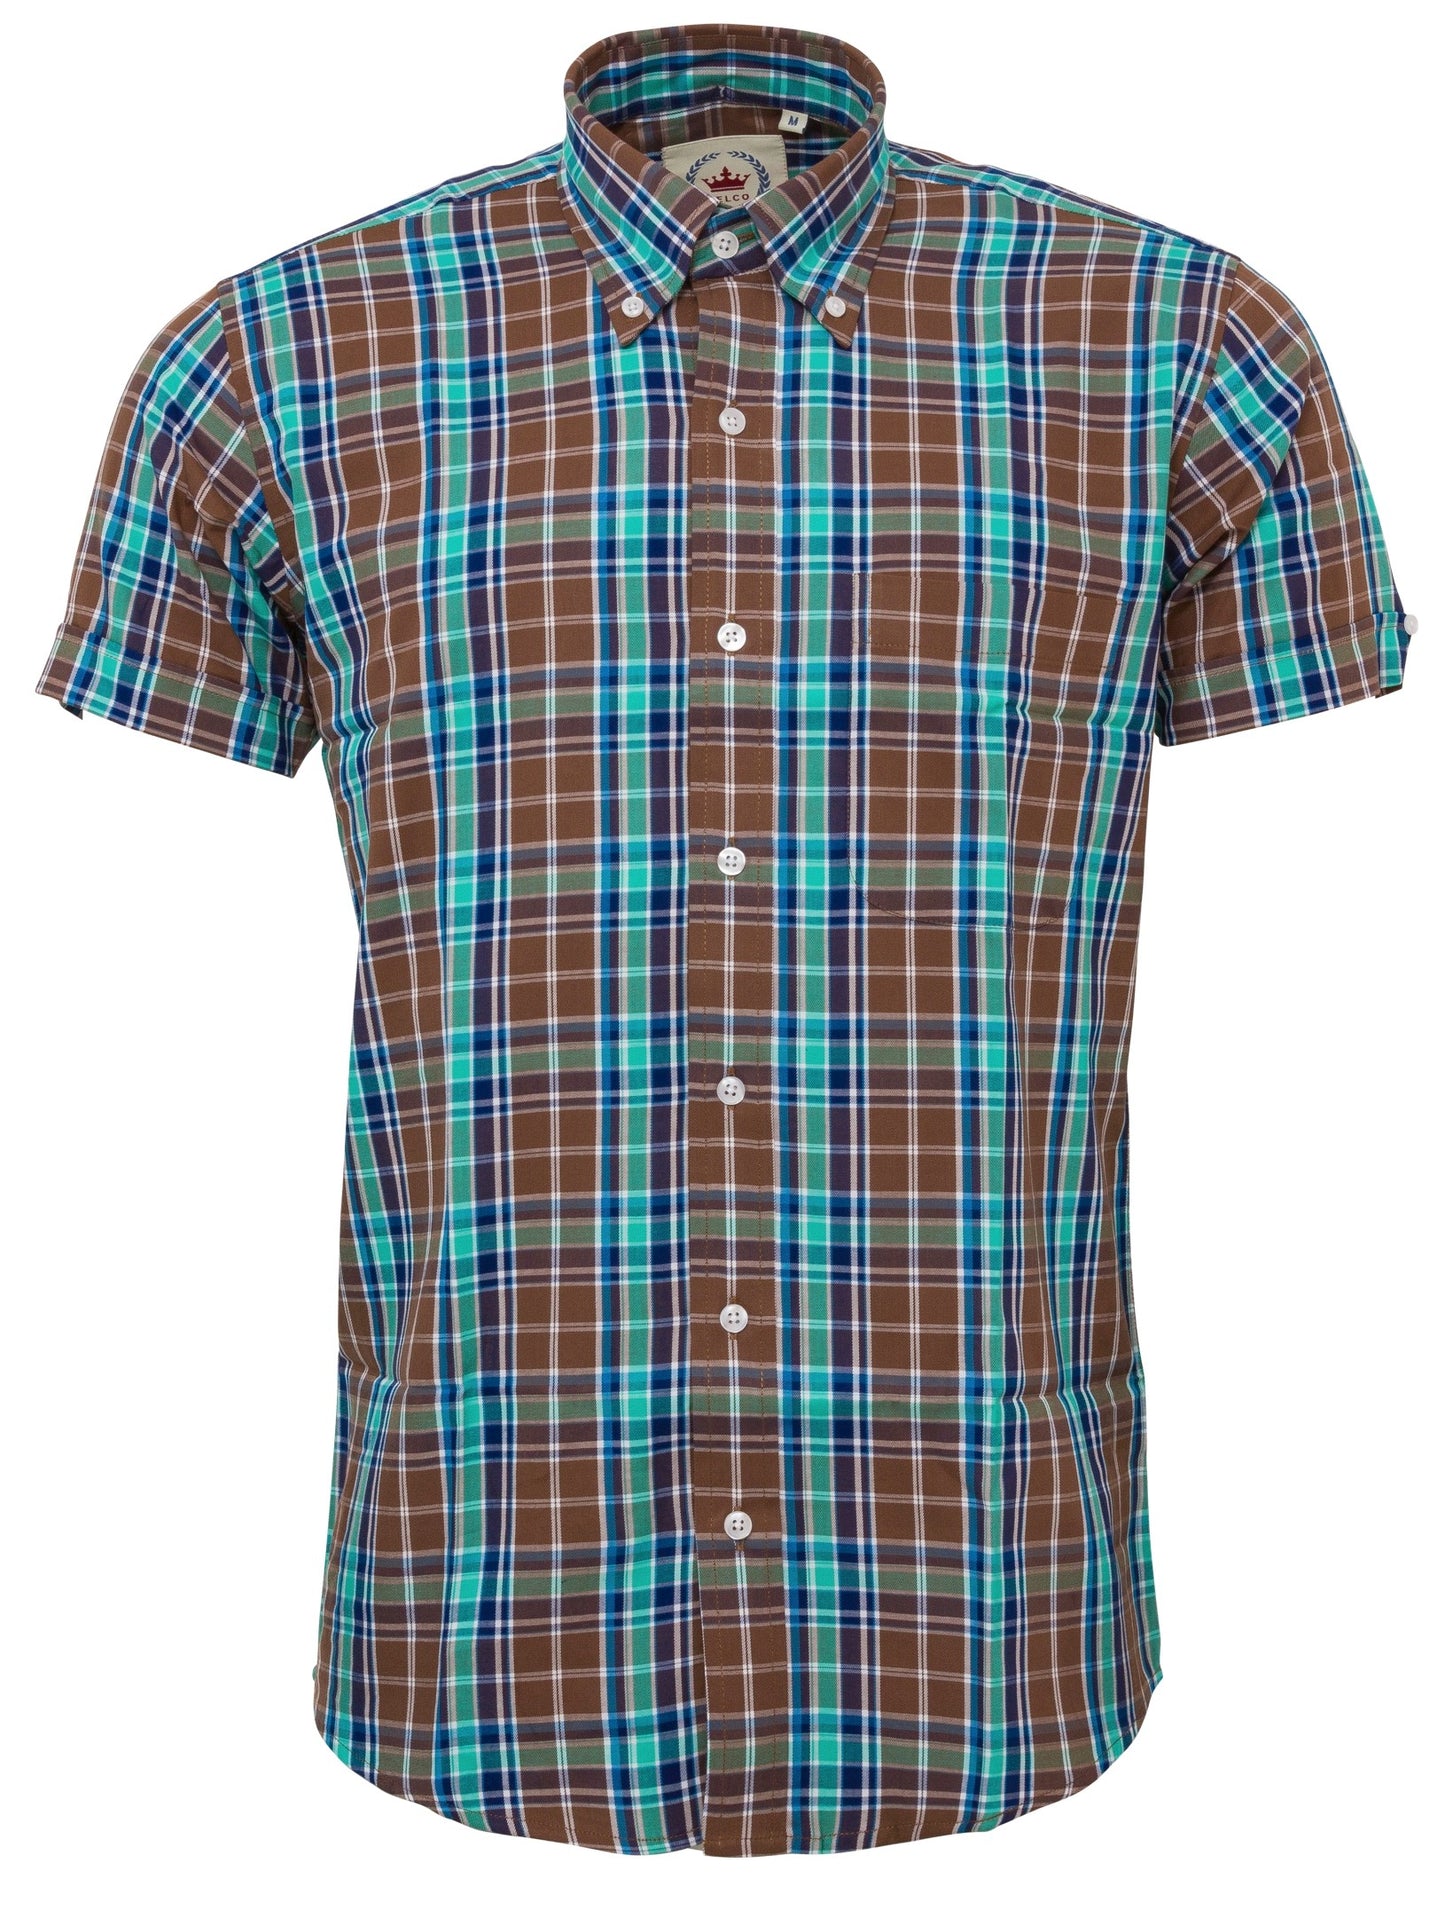 Relco Mens Brown Check Short Sleeved Vintage/Retro Mod Button Down Shirts